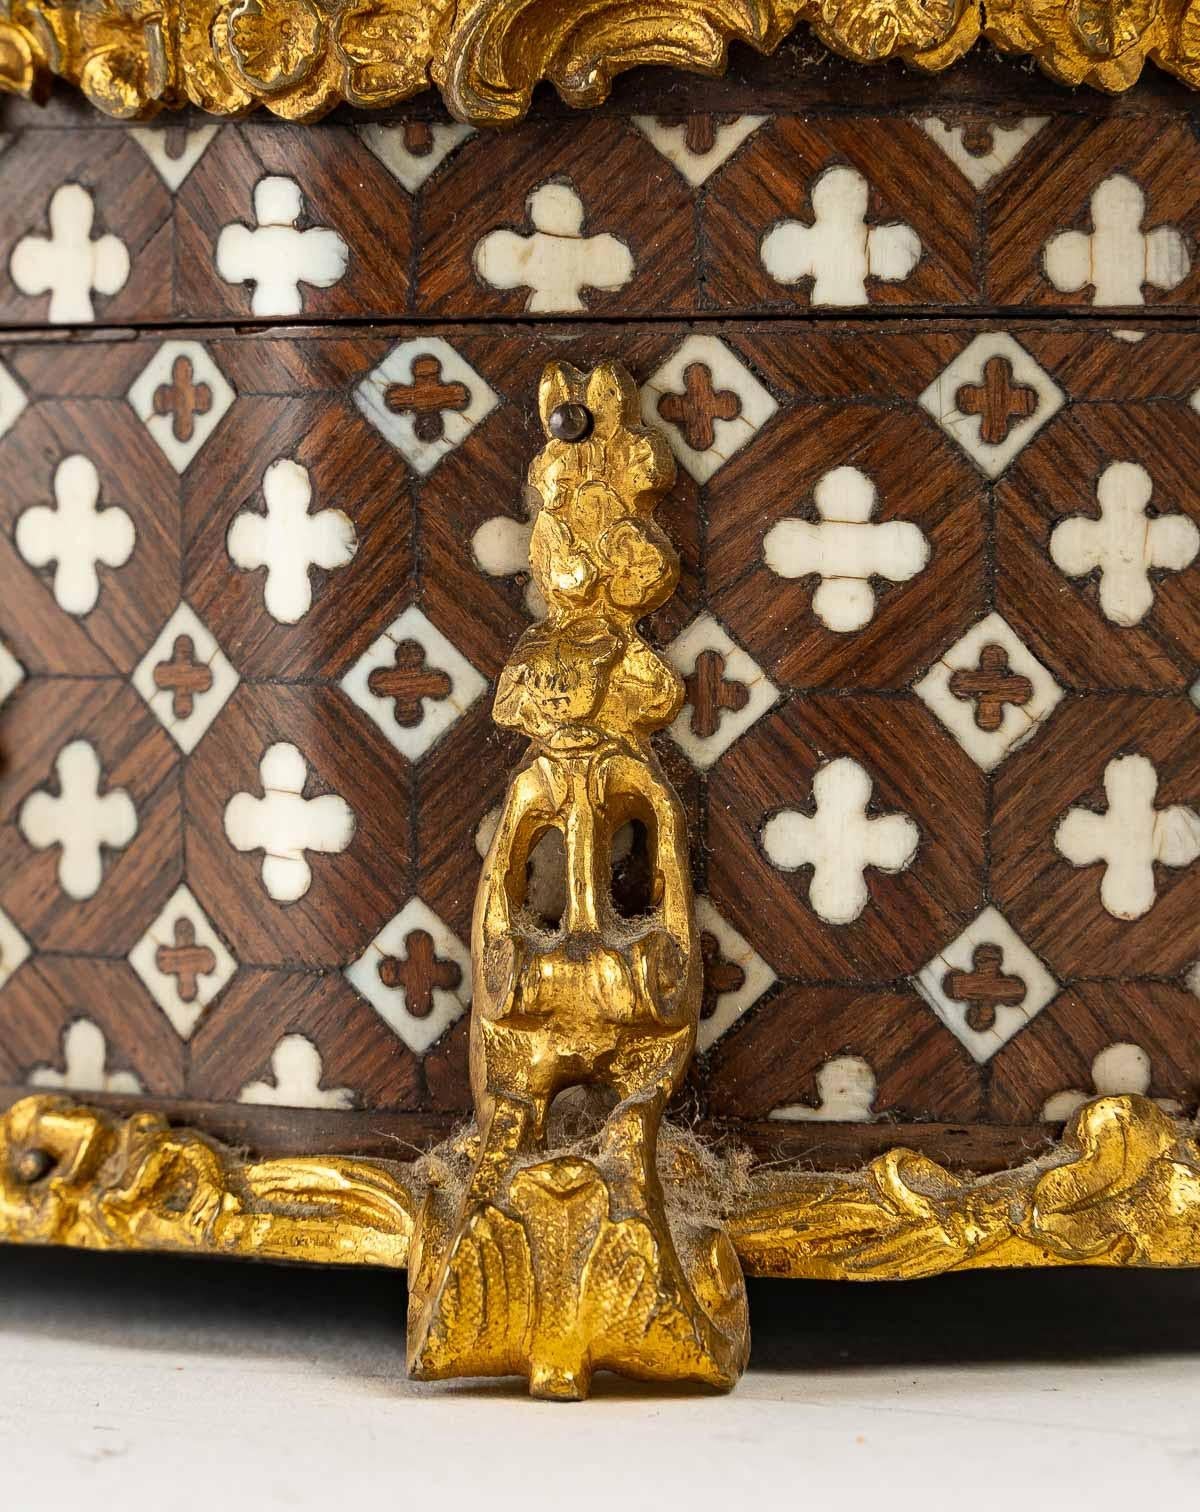 Jewelry box in Marquetry of the 19th century

Jewelry box in wood Marquetry, Napoleon III period, 19th century

Dimensions: H: 8cm, W: 15cm, D: 10cm.